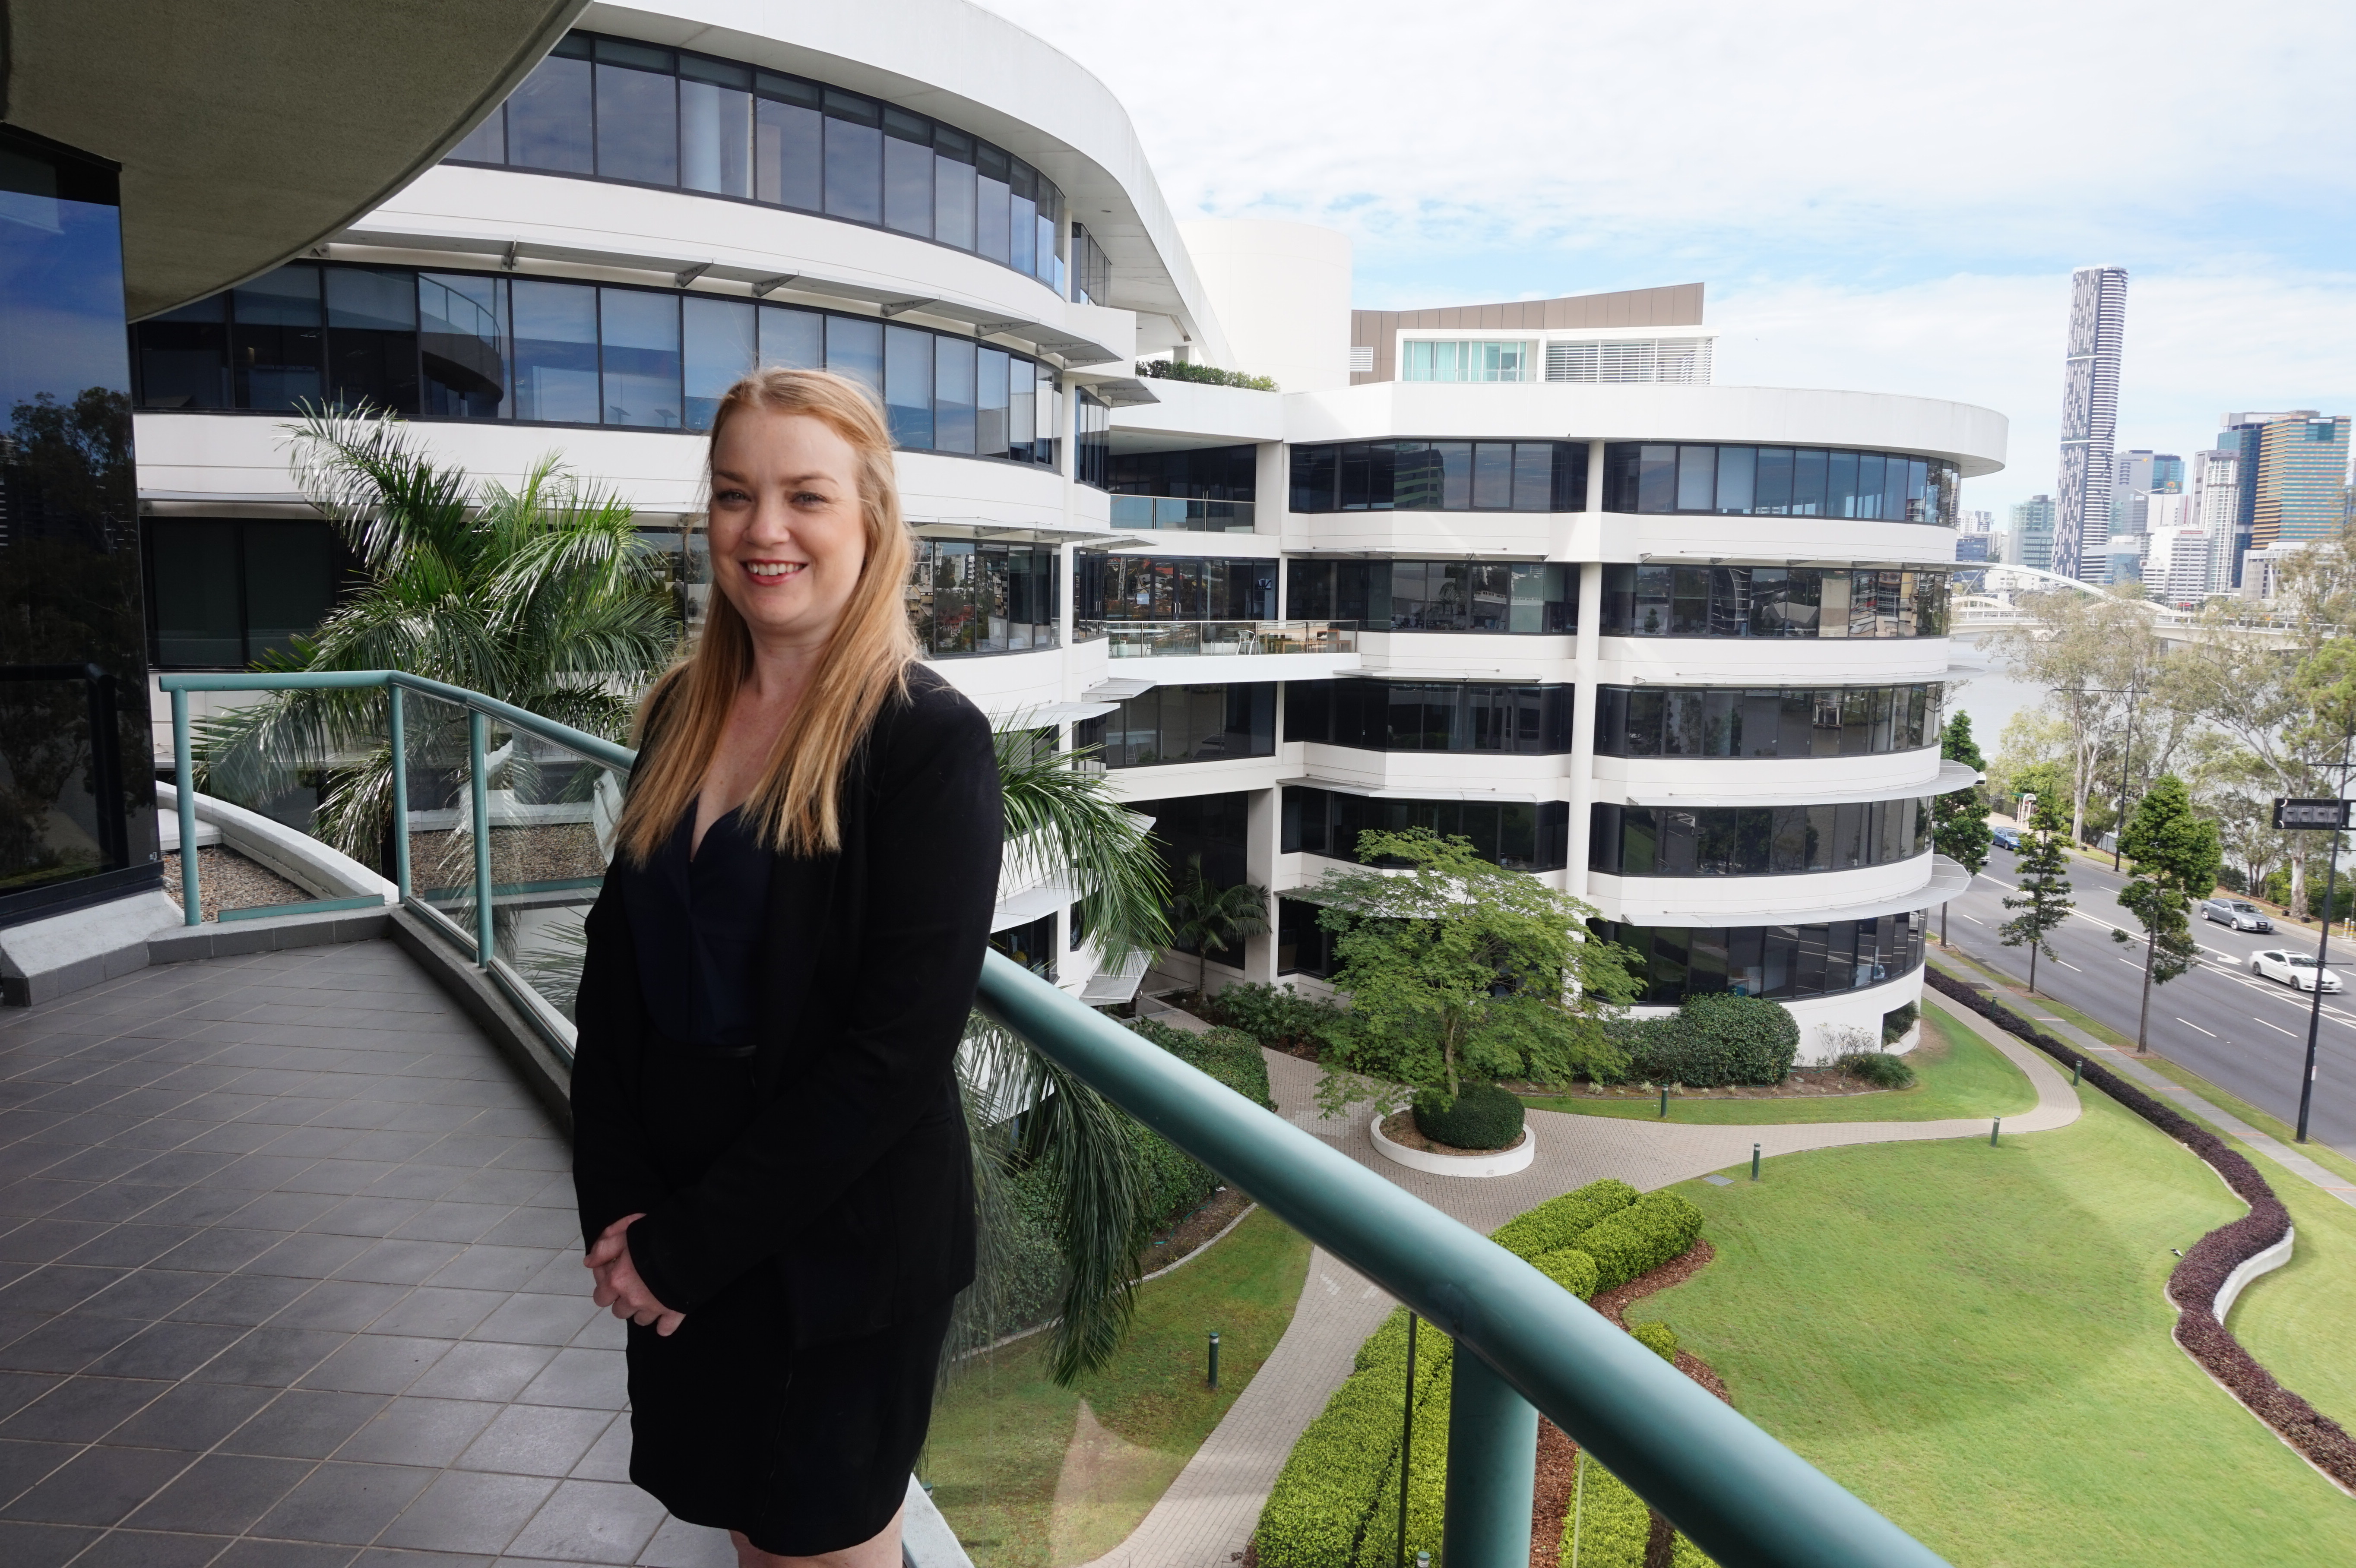 Bachelor of Business graduate Marnie Stewart is urging students to take advantage of Griffith's Industry Mentoring Program